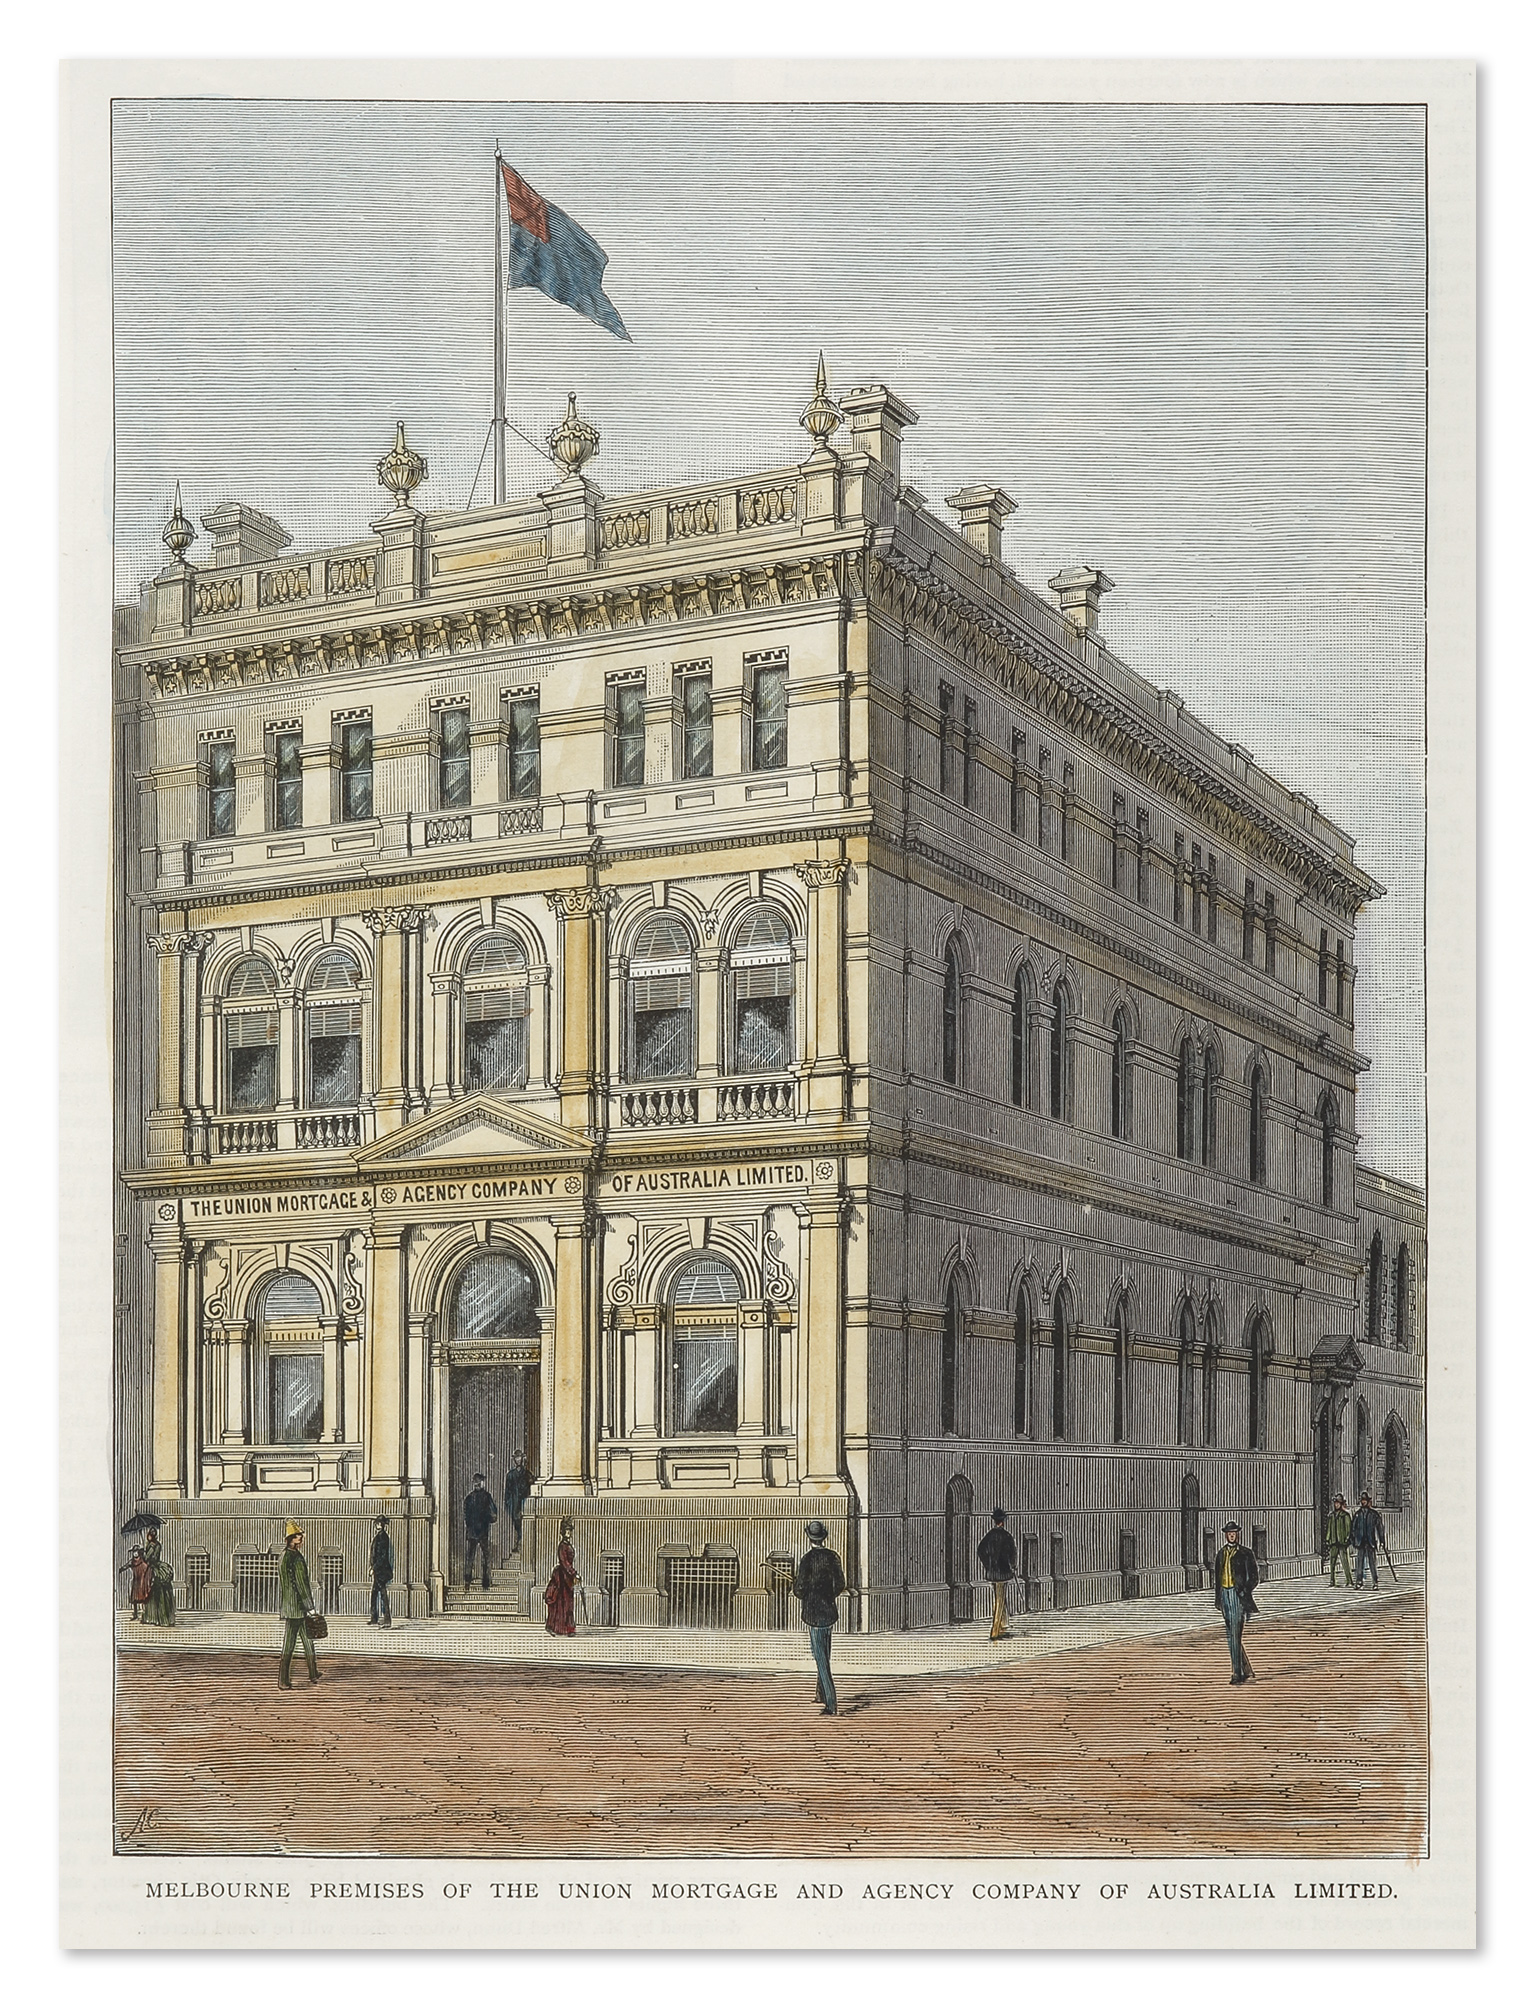 Melbourne Premises of the Union Mortgage and Agency Company of Australia Limited. - Antique Print from 1887